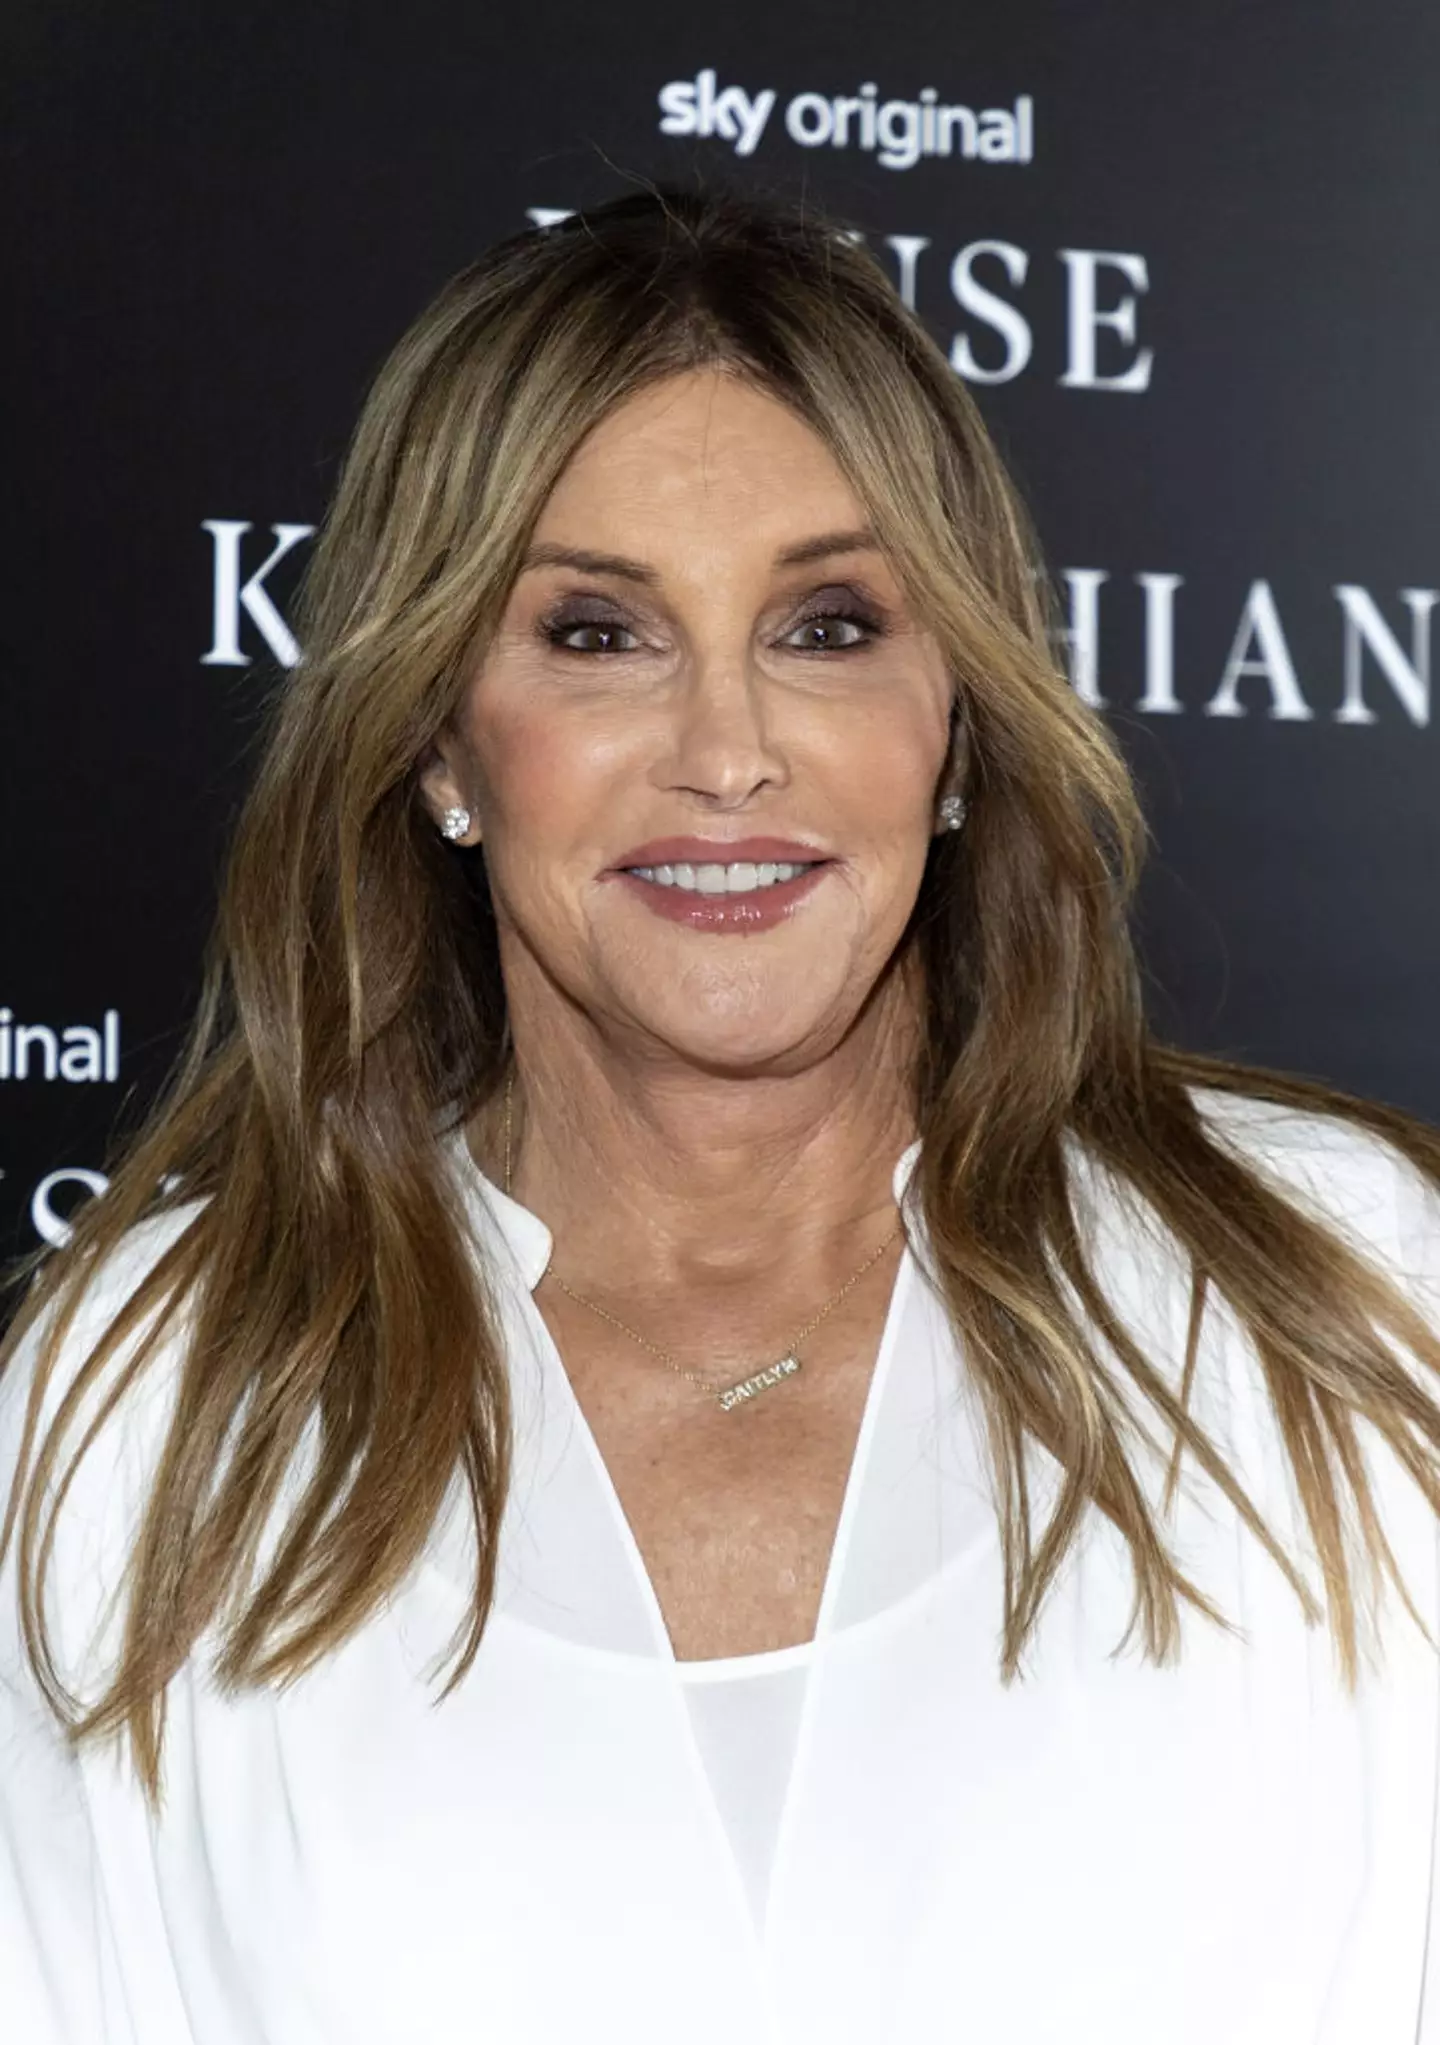 Caitlyn Jenner has defended her post about the late OJ Simpson. (Mike Marsland/Mike Marsland/Getty Images for Sky)